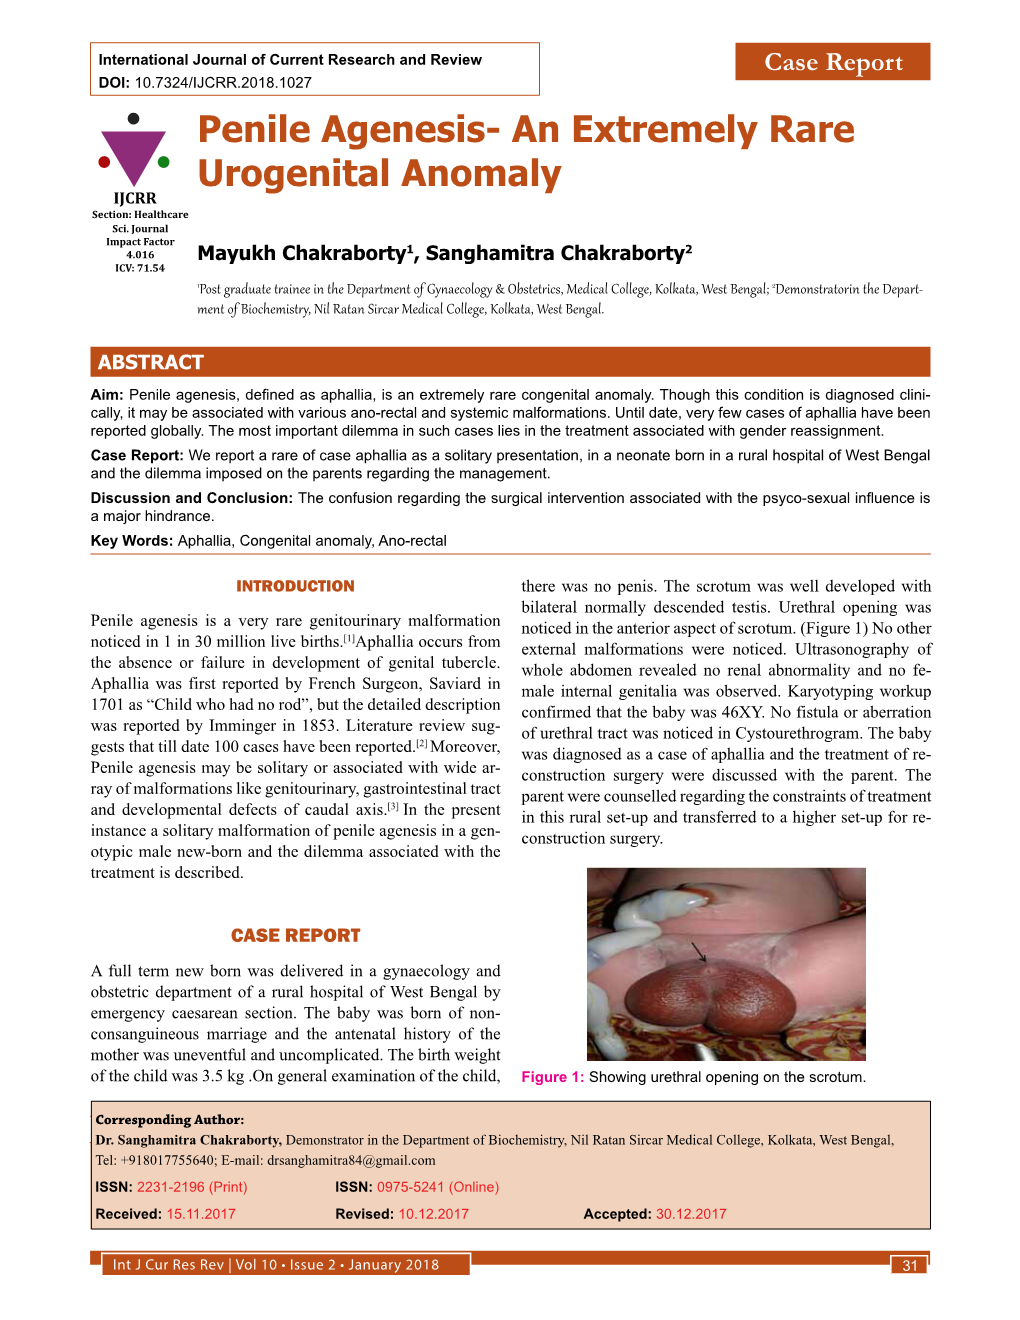 Penile Agenesis- an Extremely Rare Urogenital Anomaly IJCRR Section: Healthcare Sci